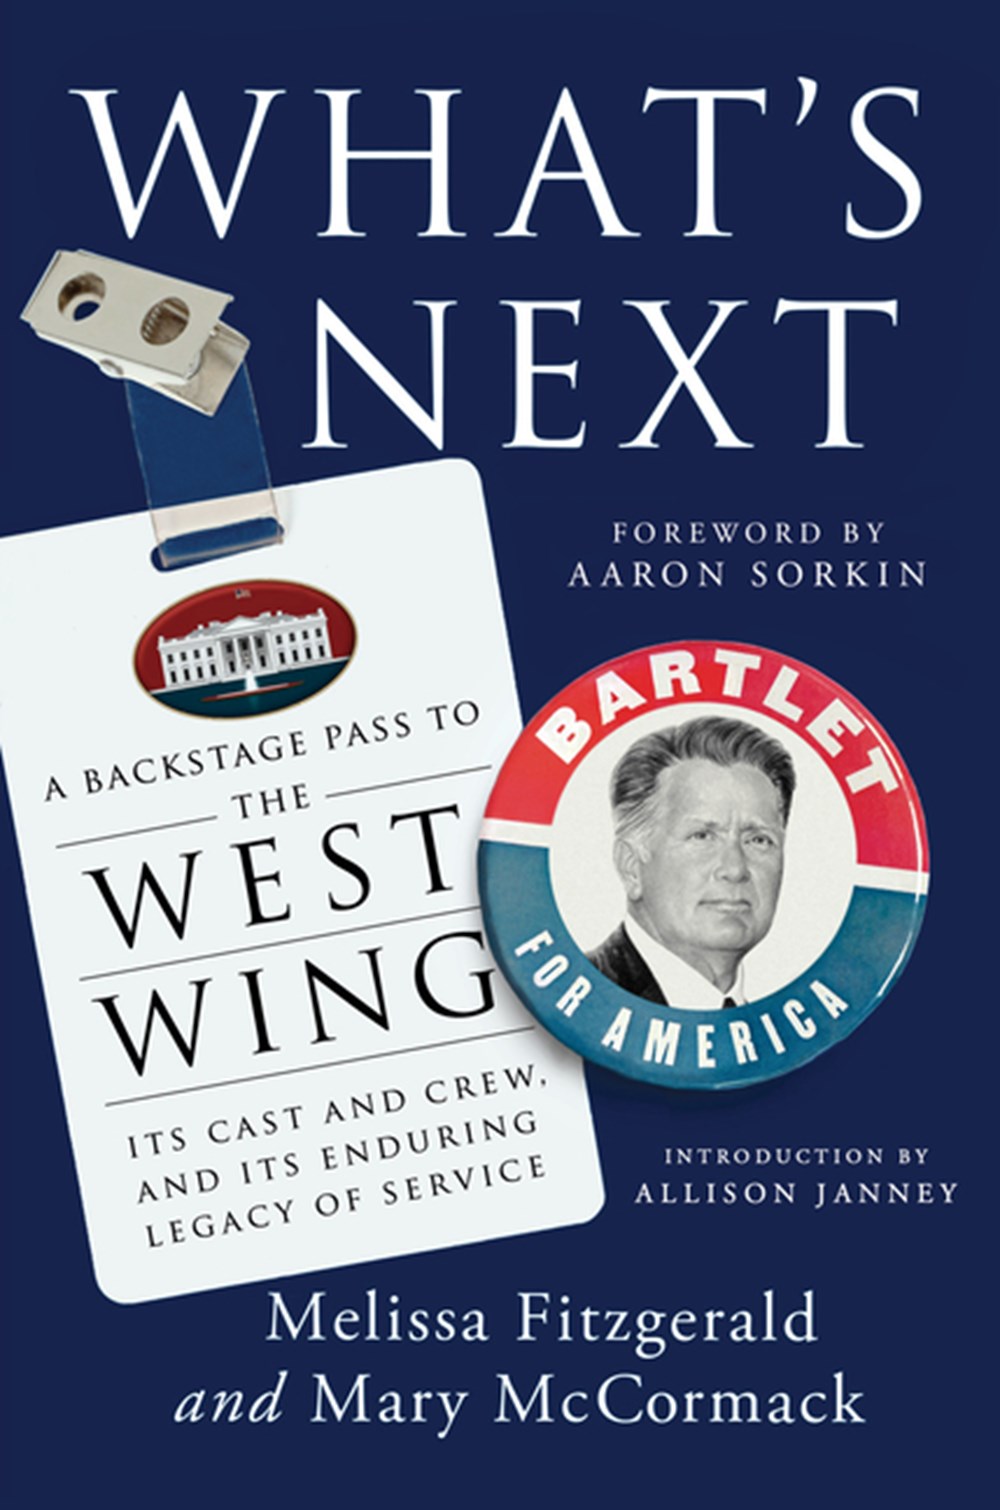 What's Next: A Backstage Pass to the West Wing, Its Cast and Crew, and Its Enduring Legacy of Servic